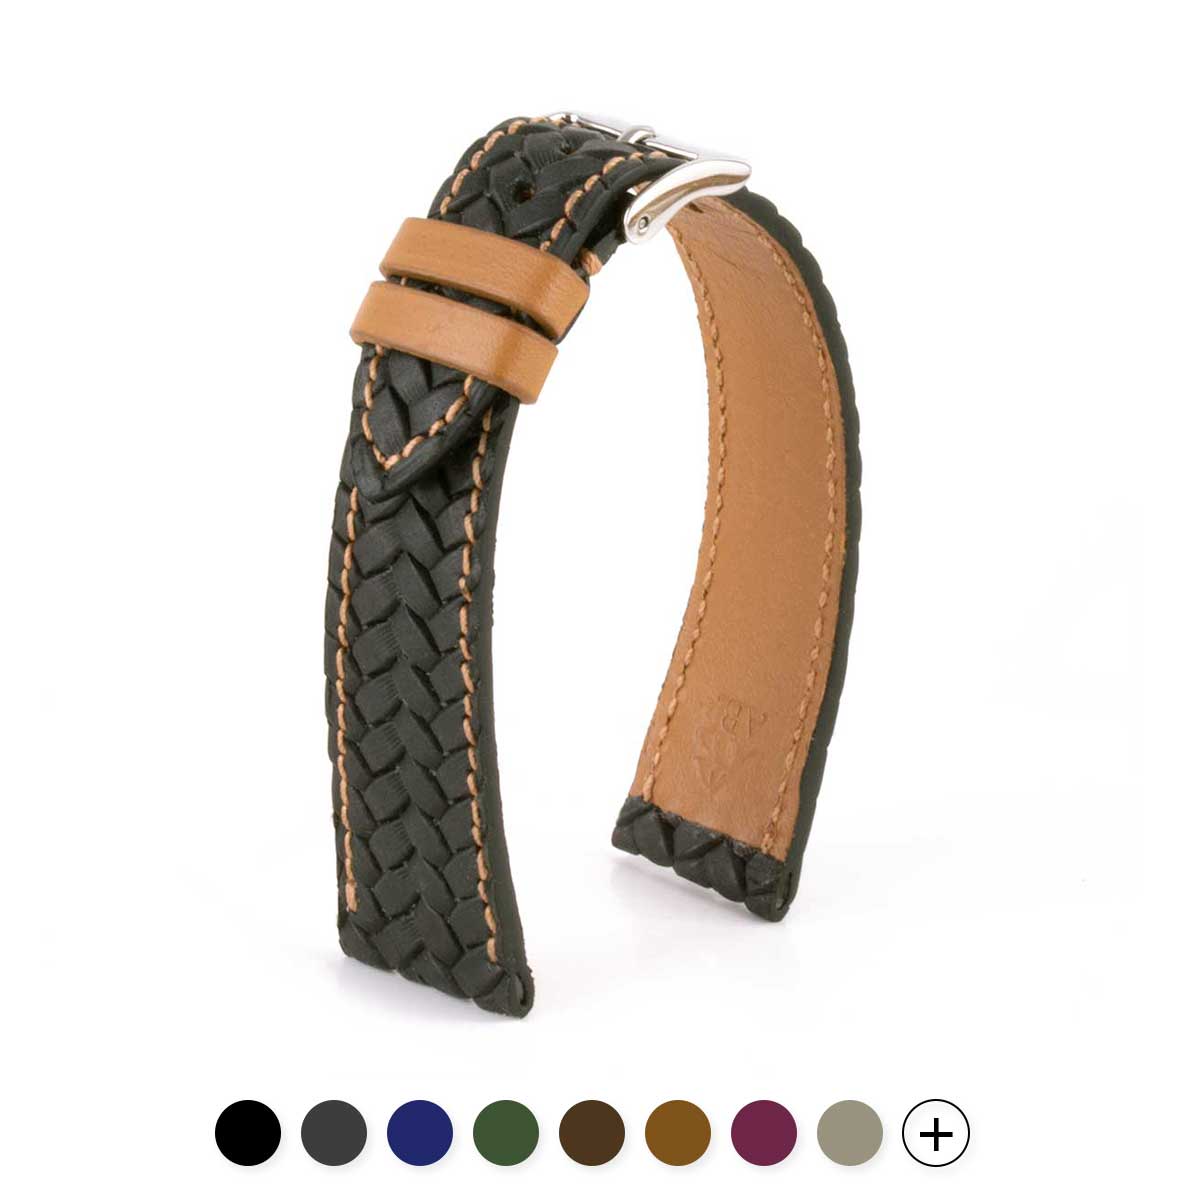 Leather watch-band - Braided calf strap (black, blue, brown...)